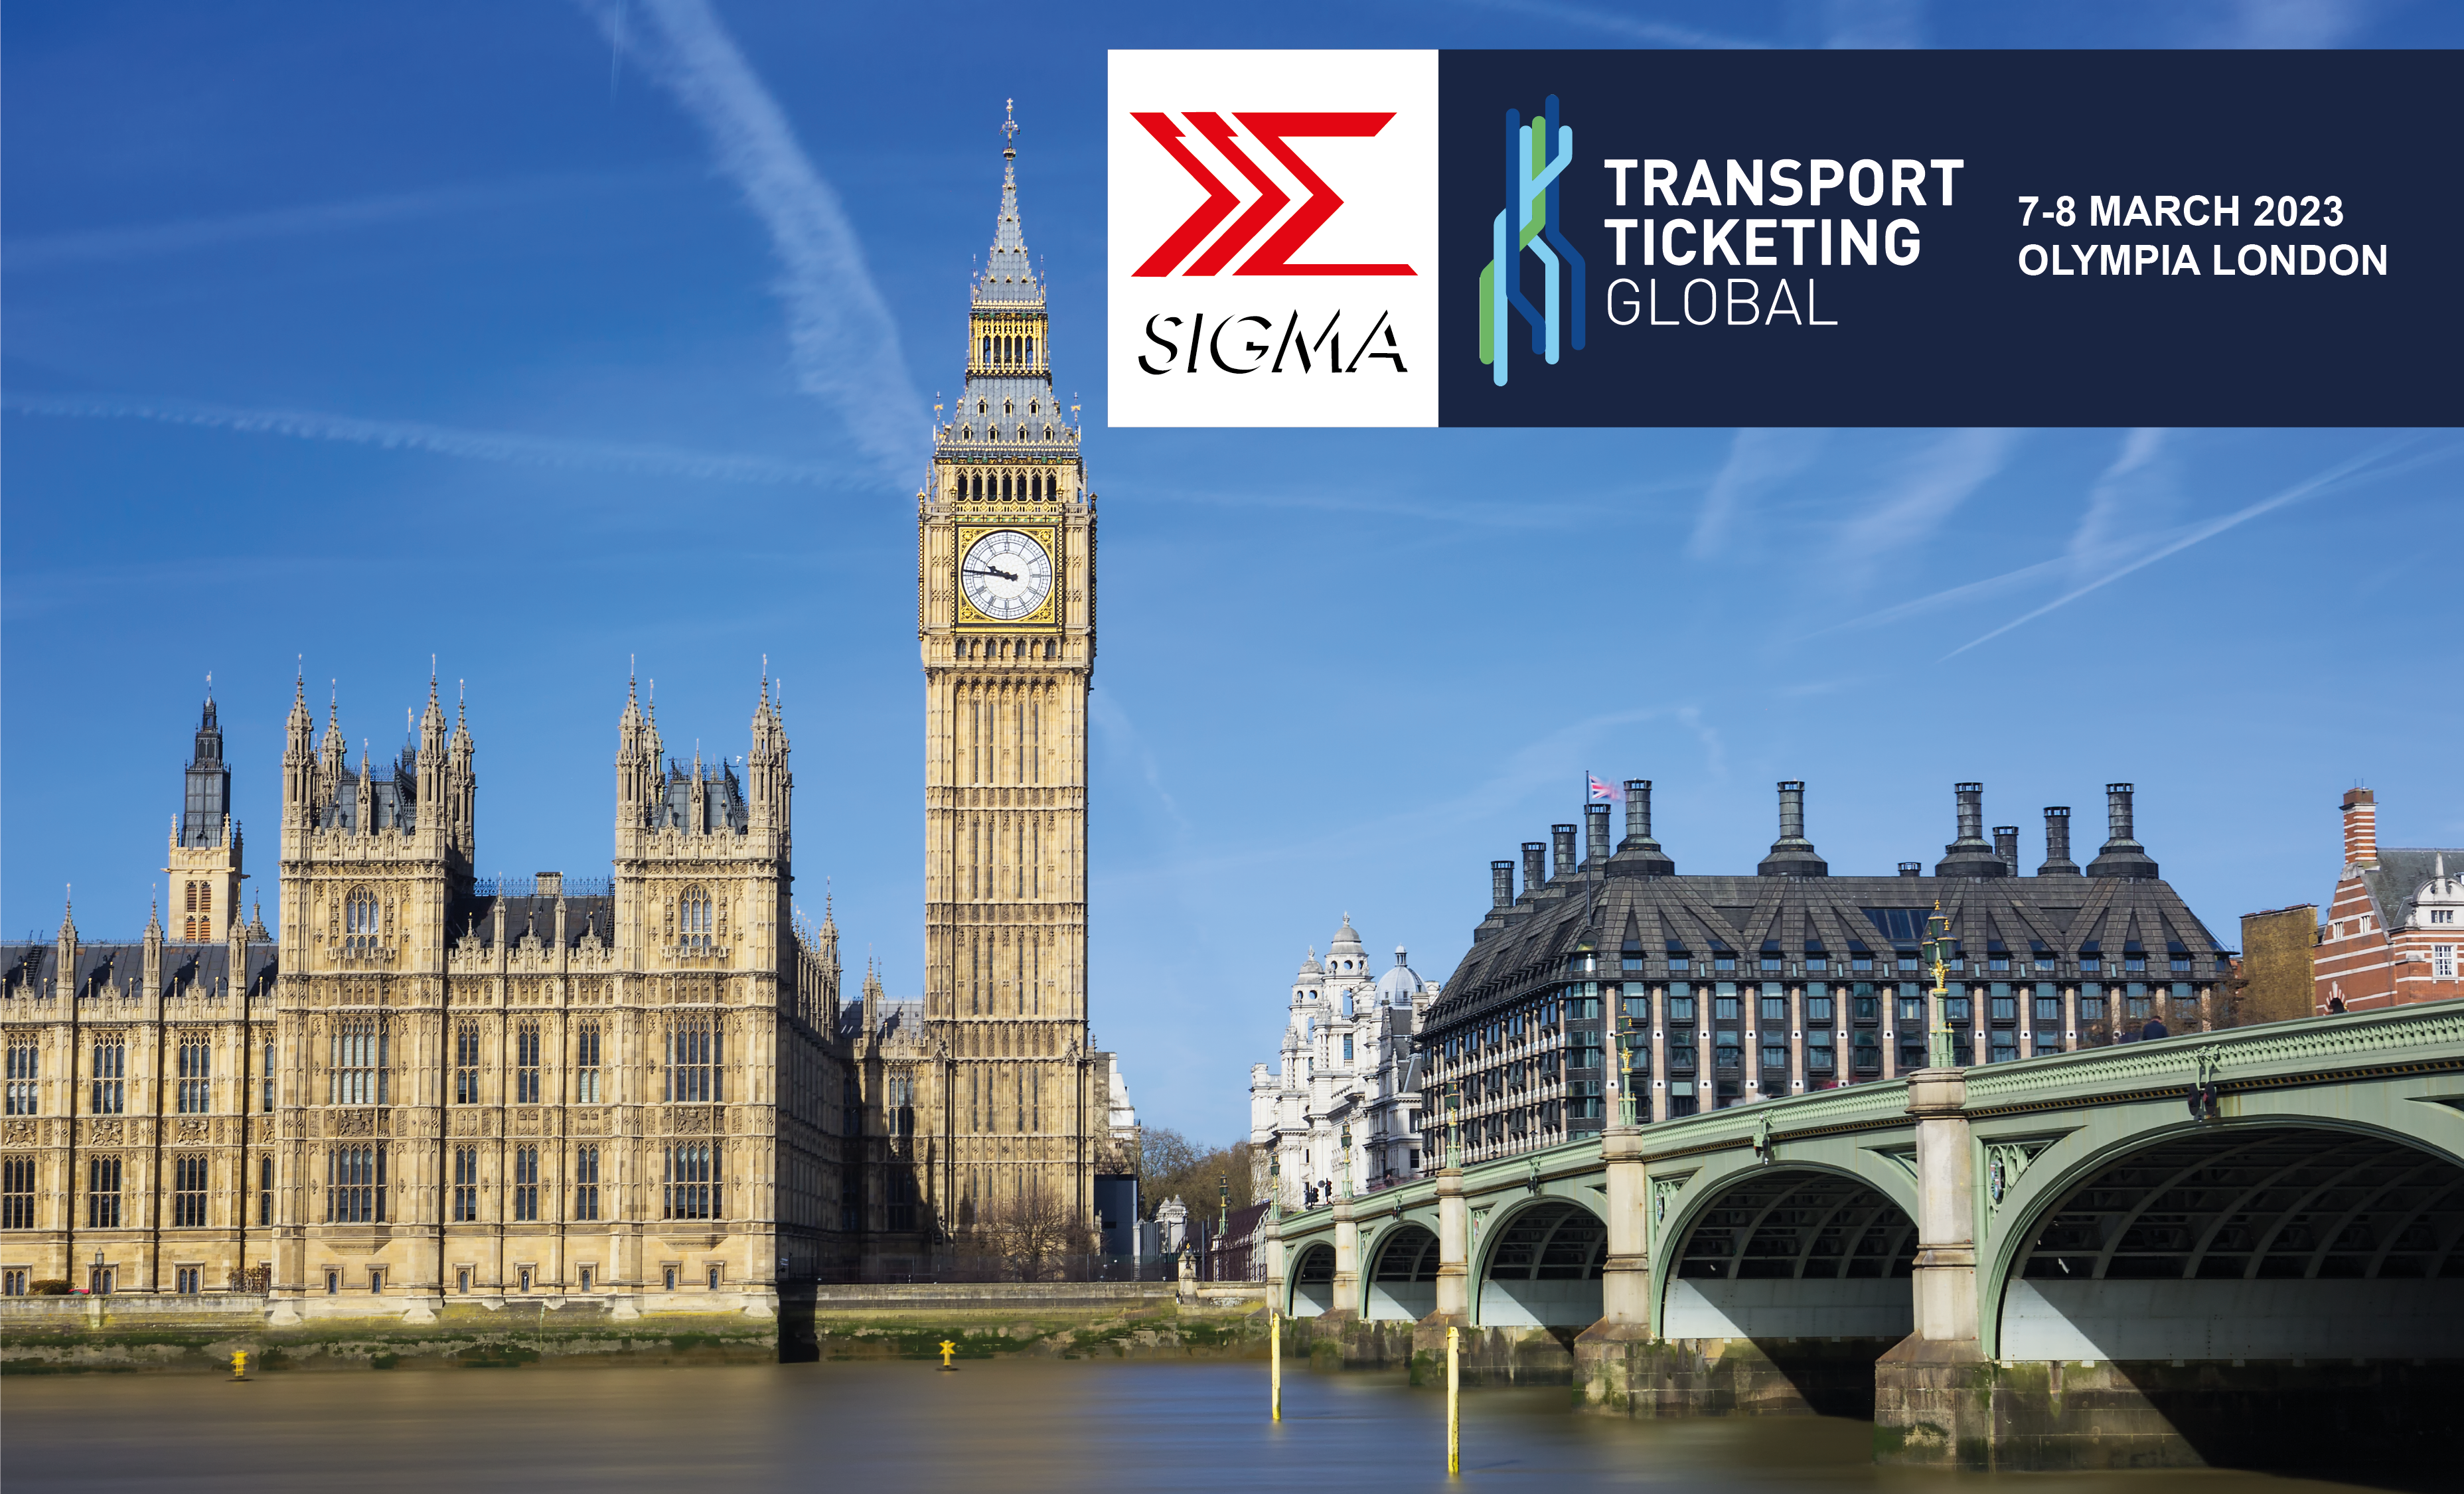 <em>SIGMA Spa will once again exhibit at Transport Ticketing Global in London, the most important event in the Transport Ticketing sector.</em>